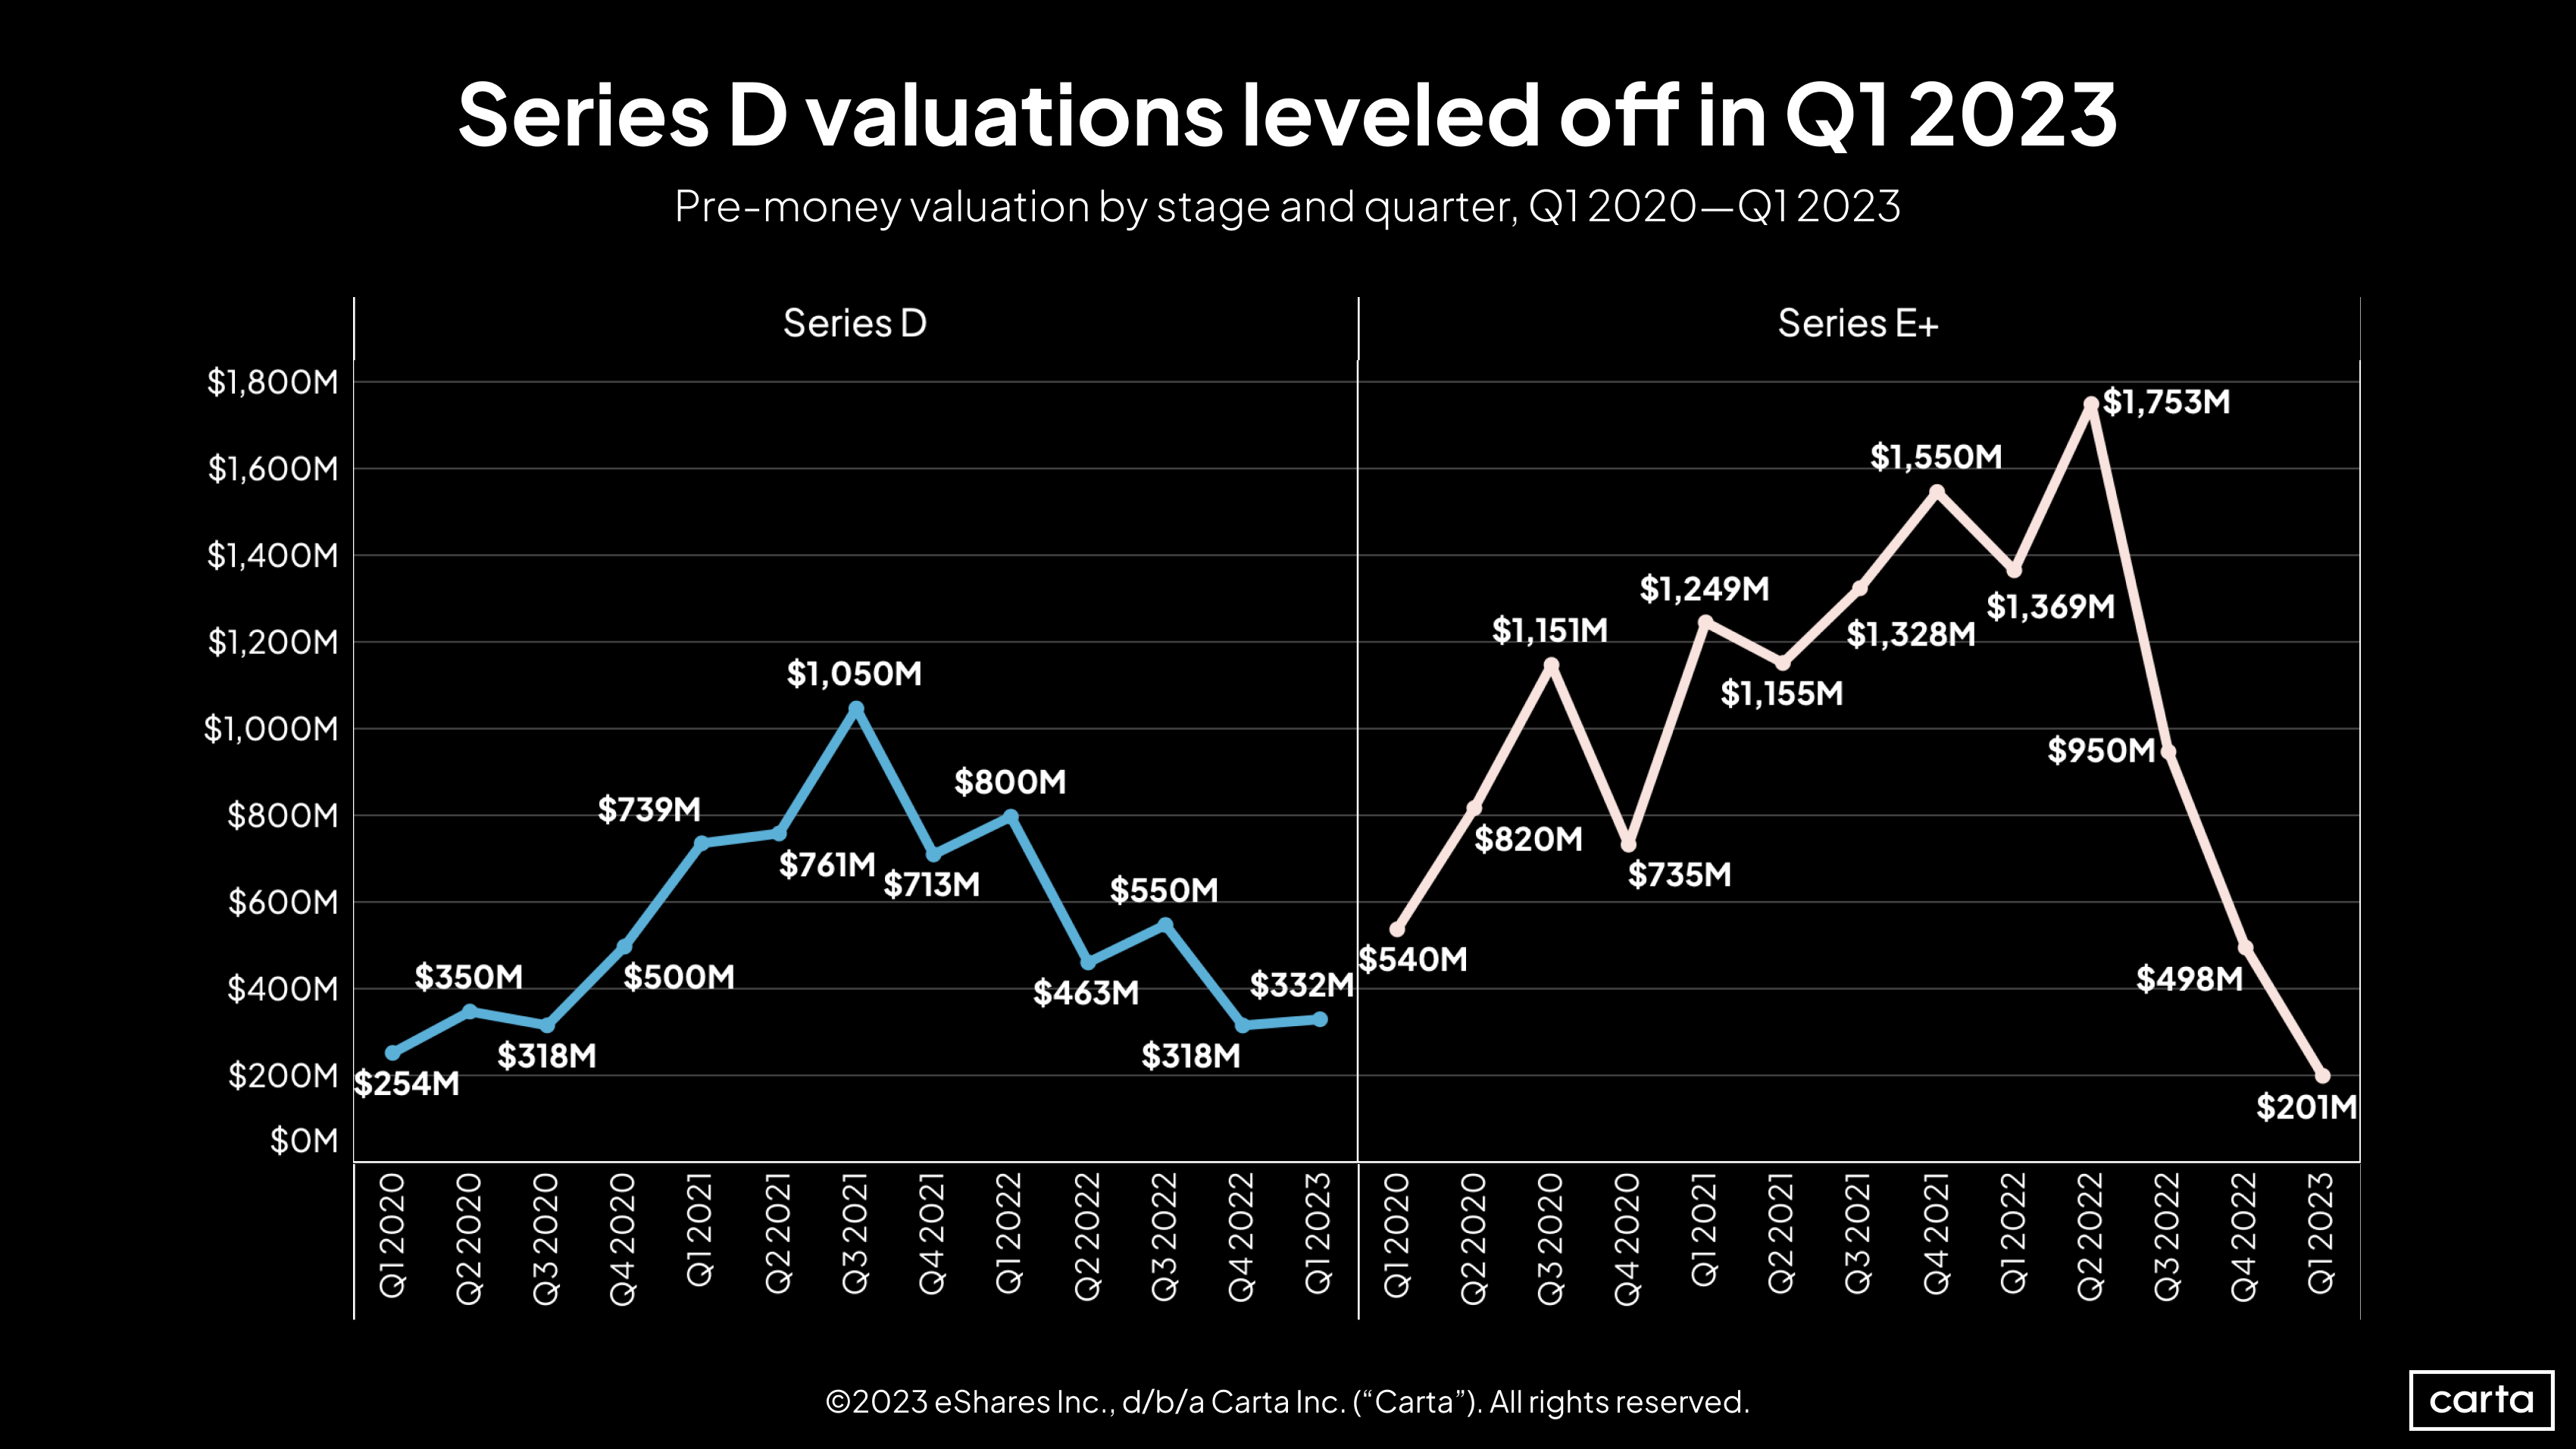 Pre-money valuation for Series D and E+ by quarter, Q1 2020-Q1 2023